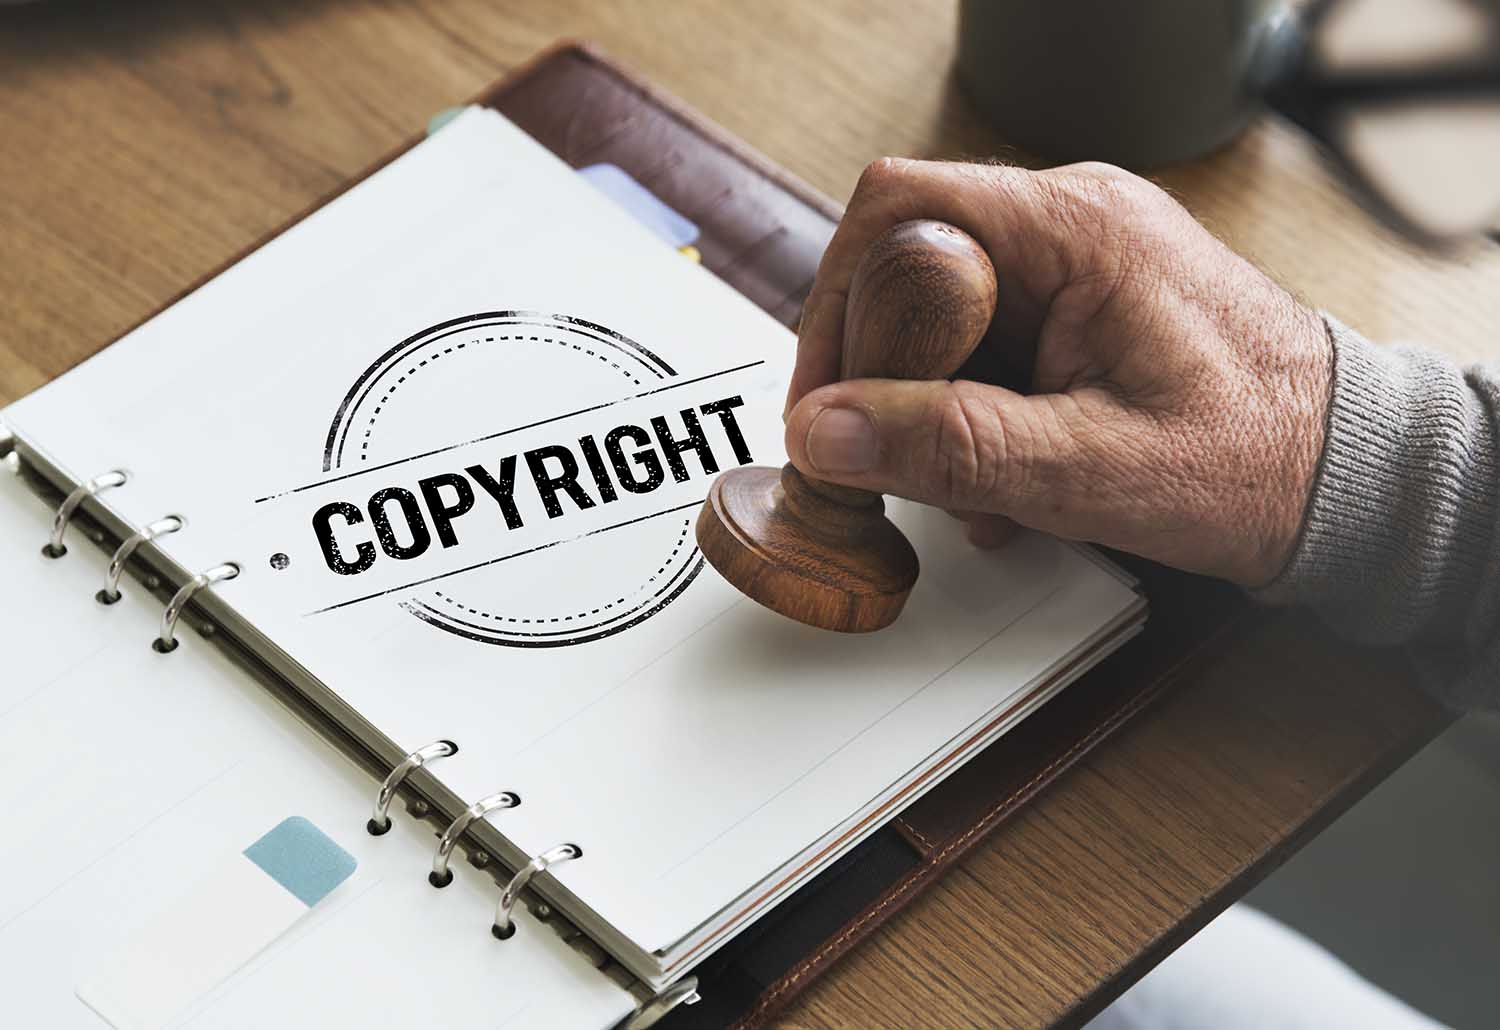 Copyright considerations and best practices